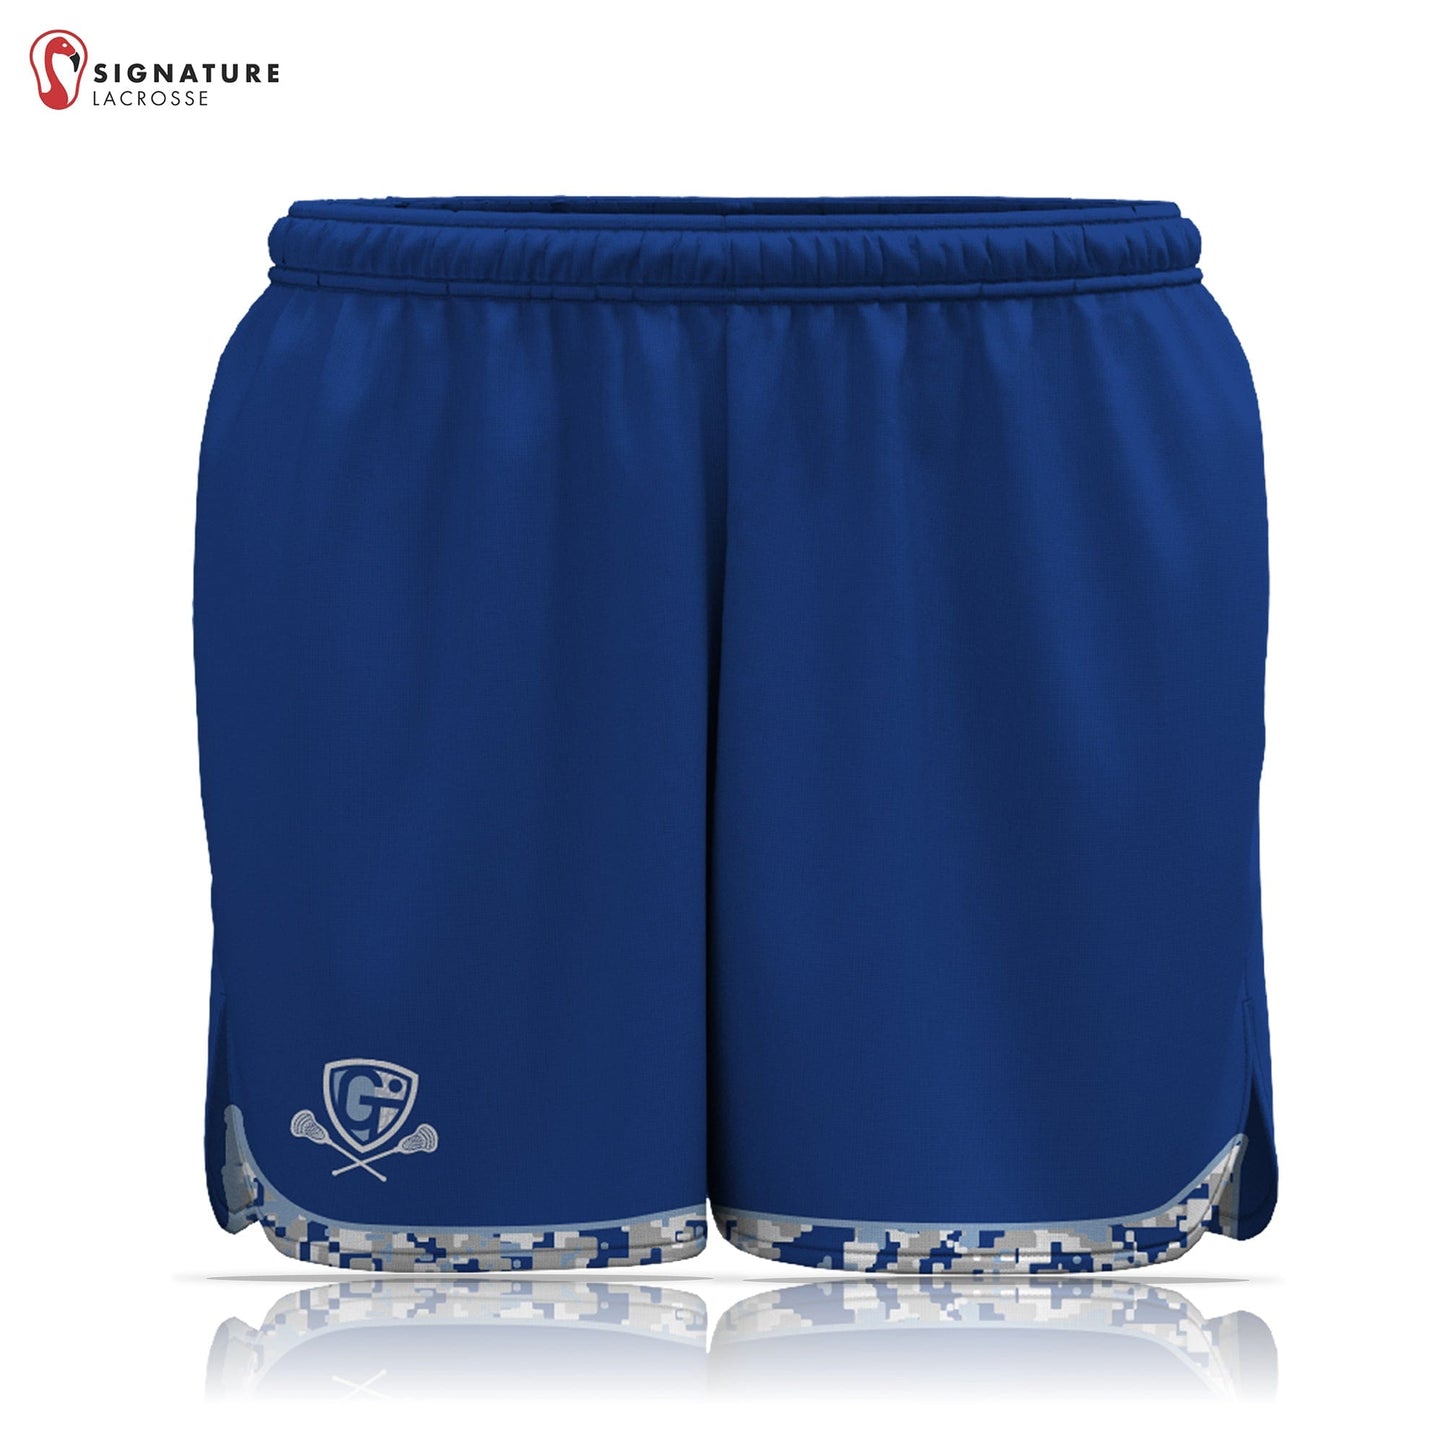 Georgetown-Triton Youth Lacrosse Women's Player Game Shorts: 1-2 Signature Lacrosse